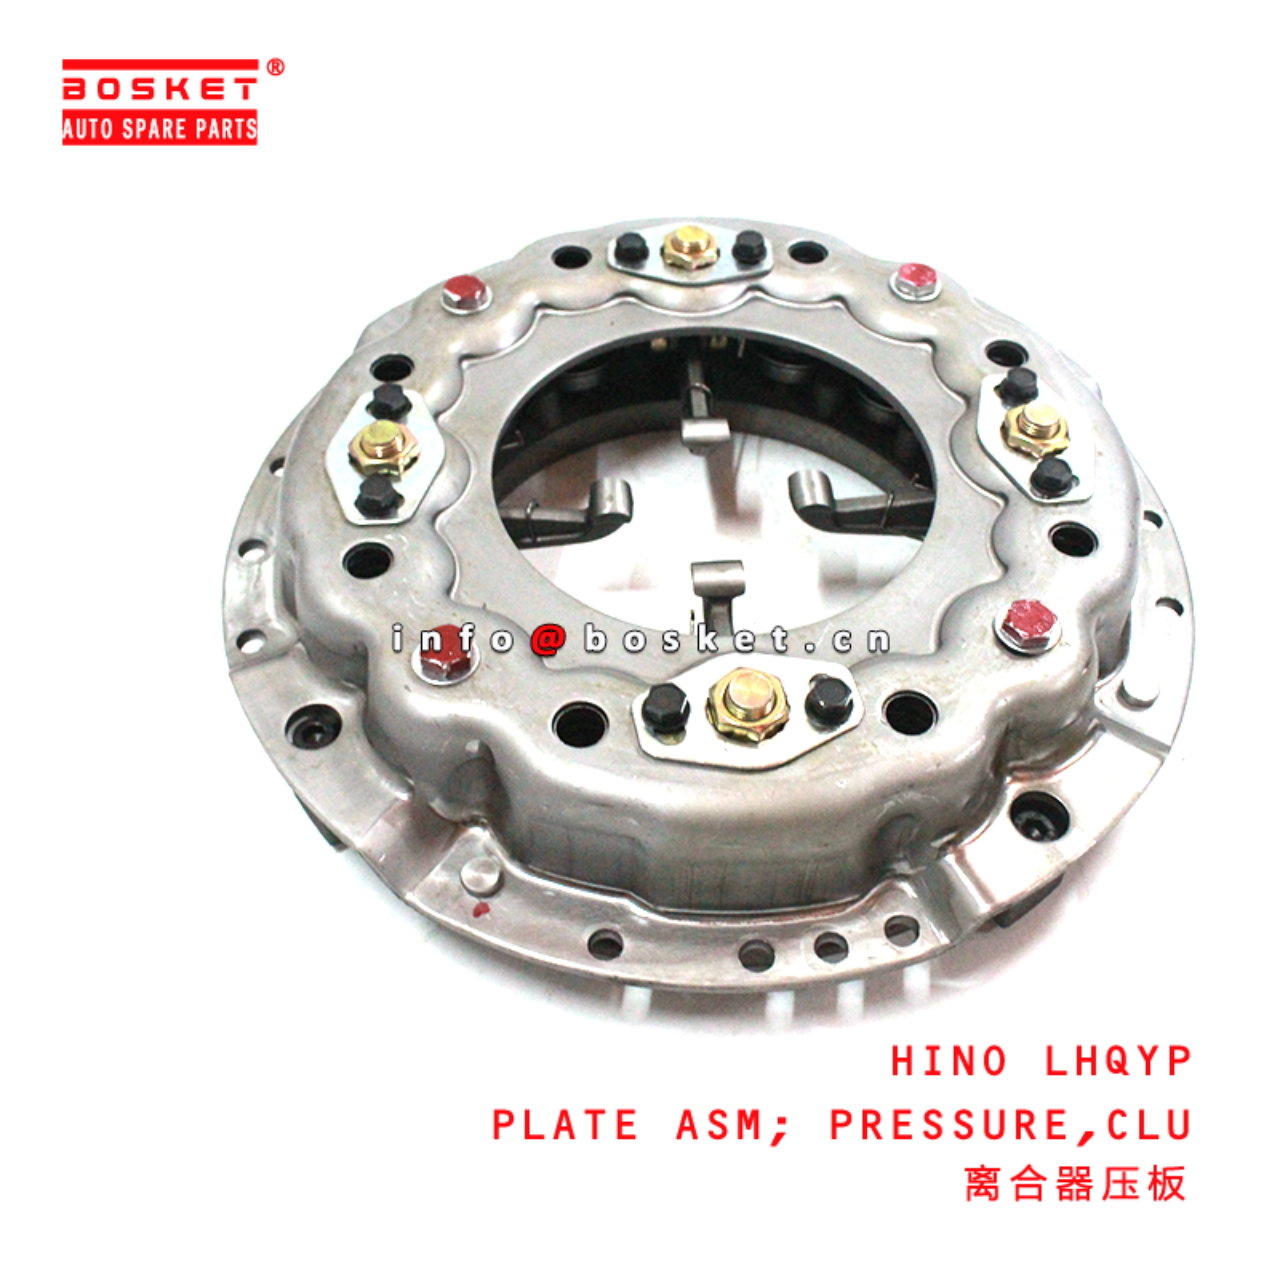 HINO LHQYP Clutch Pressure Plate Assembly Suitable for ISUZU HINO - For ...